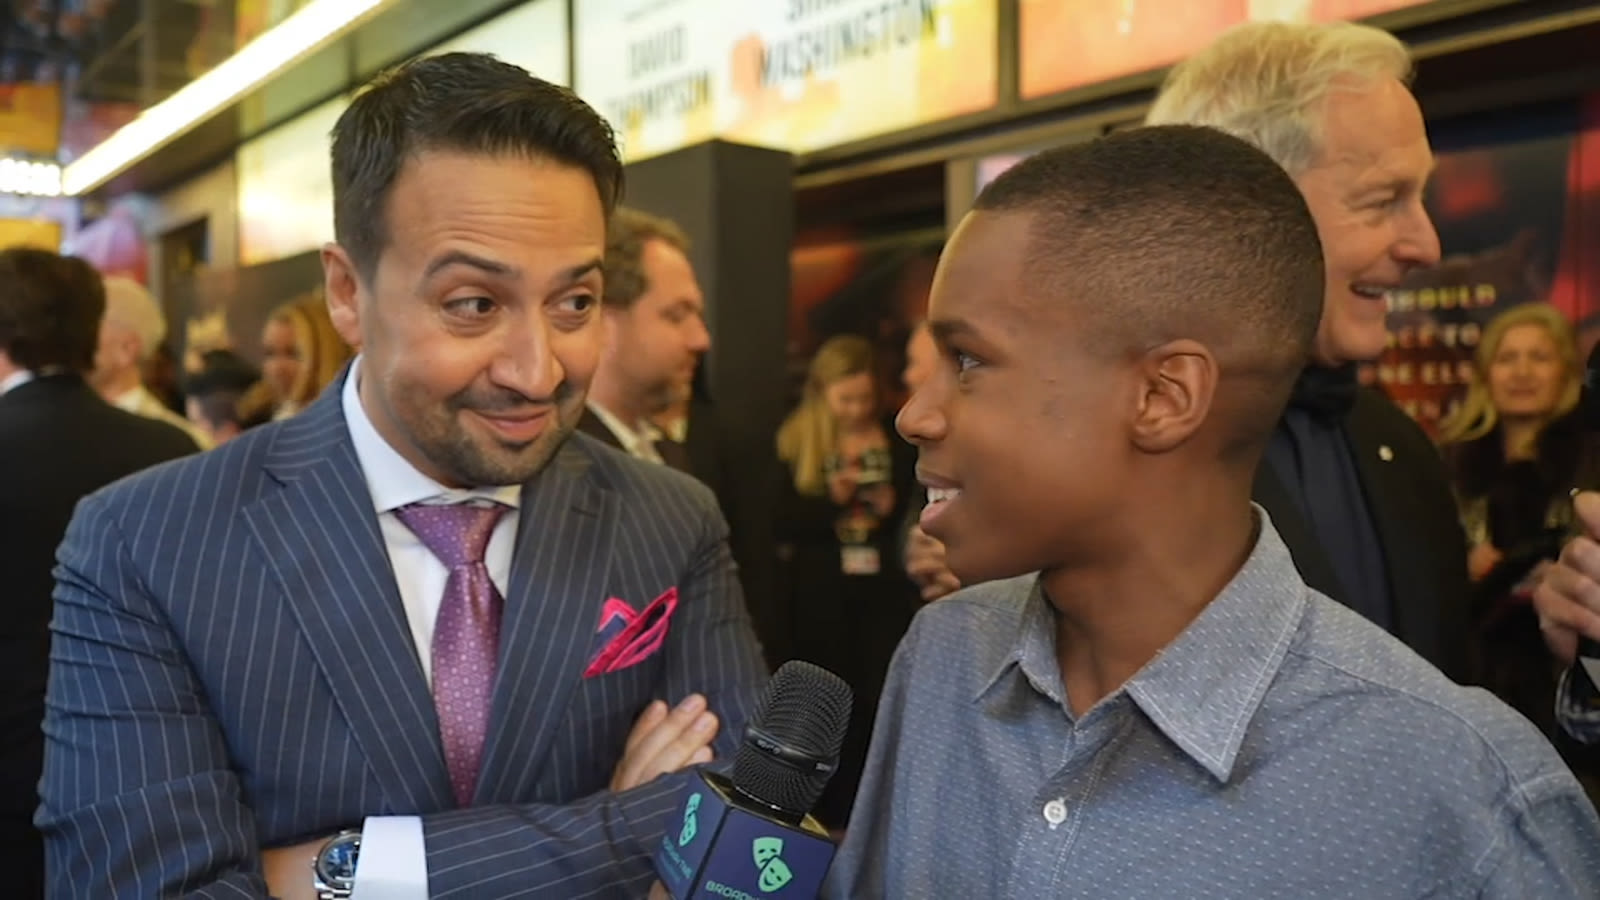 Broadway's 15-year-old journalist sensation making waves in the NYC